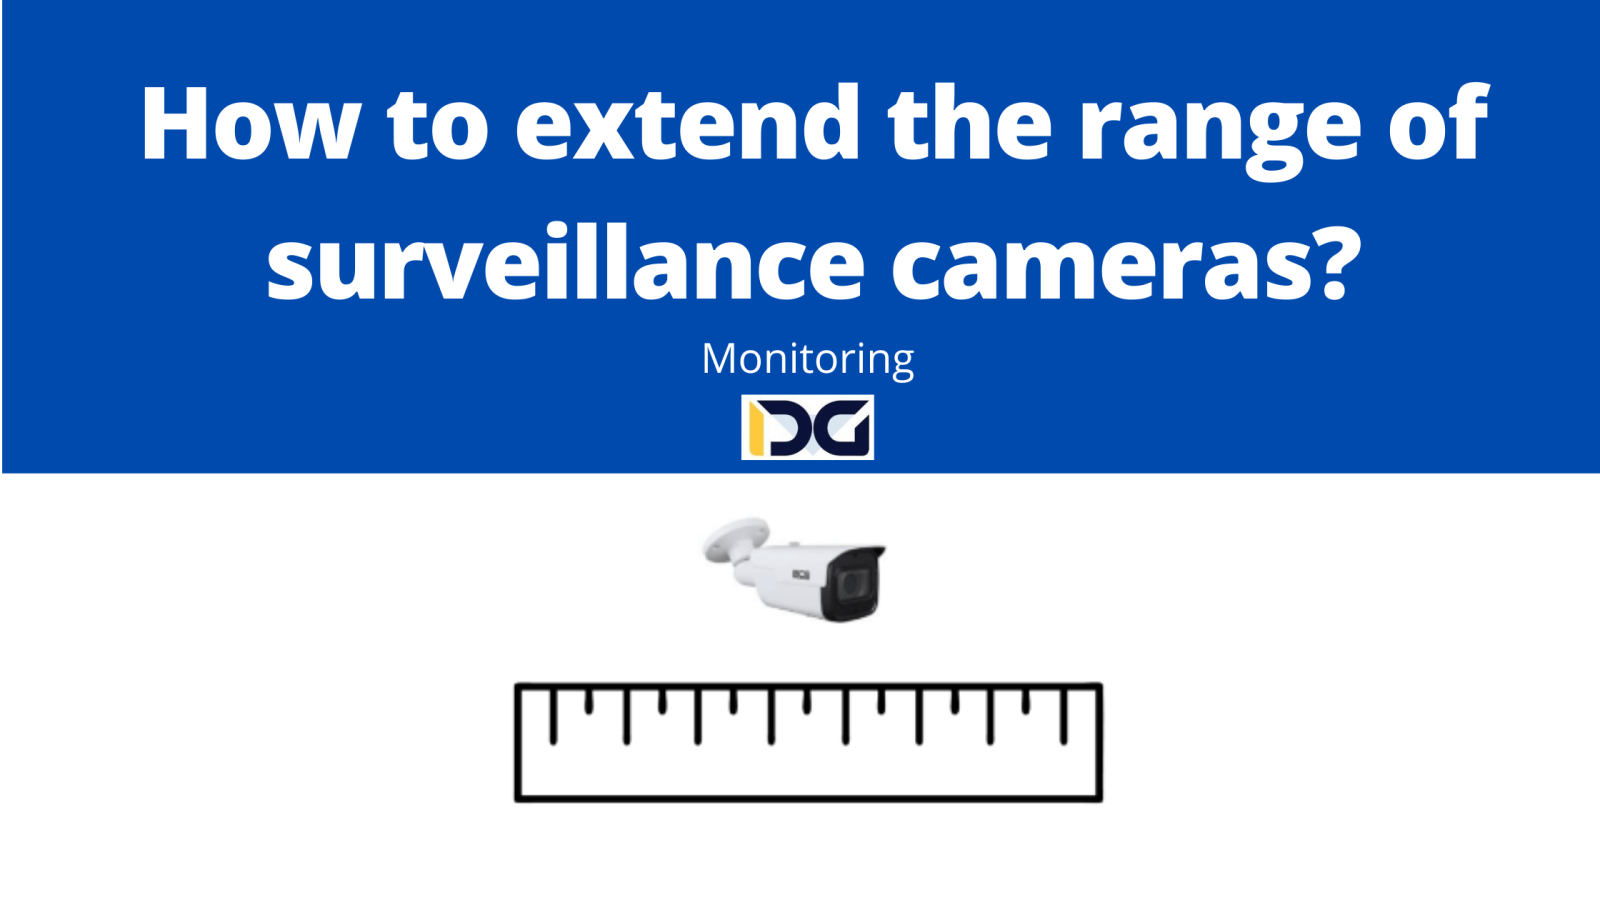 How to extend the range of surveillance cameras?